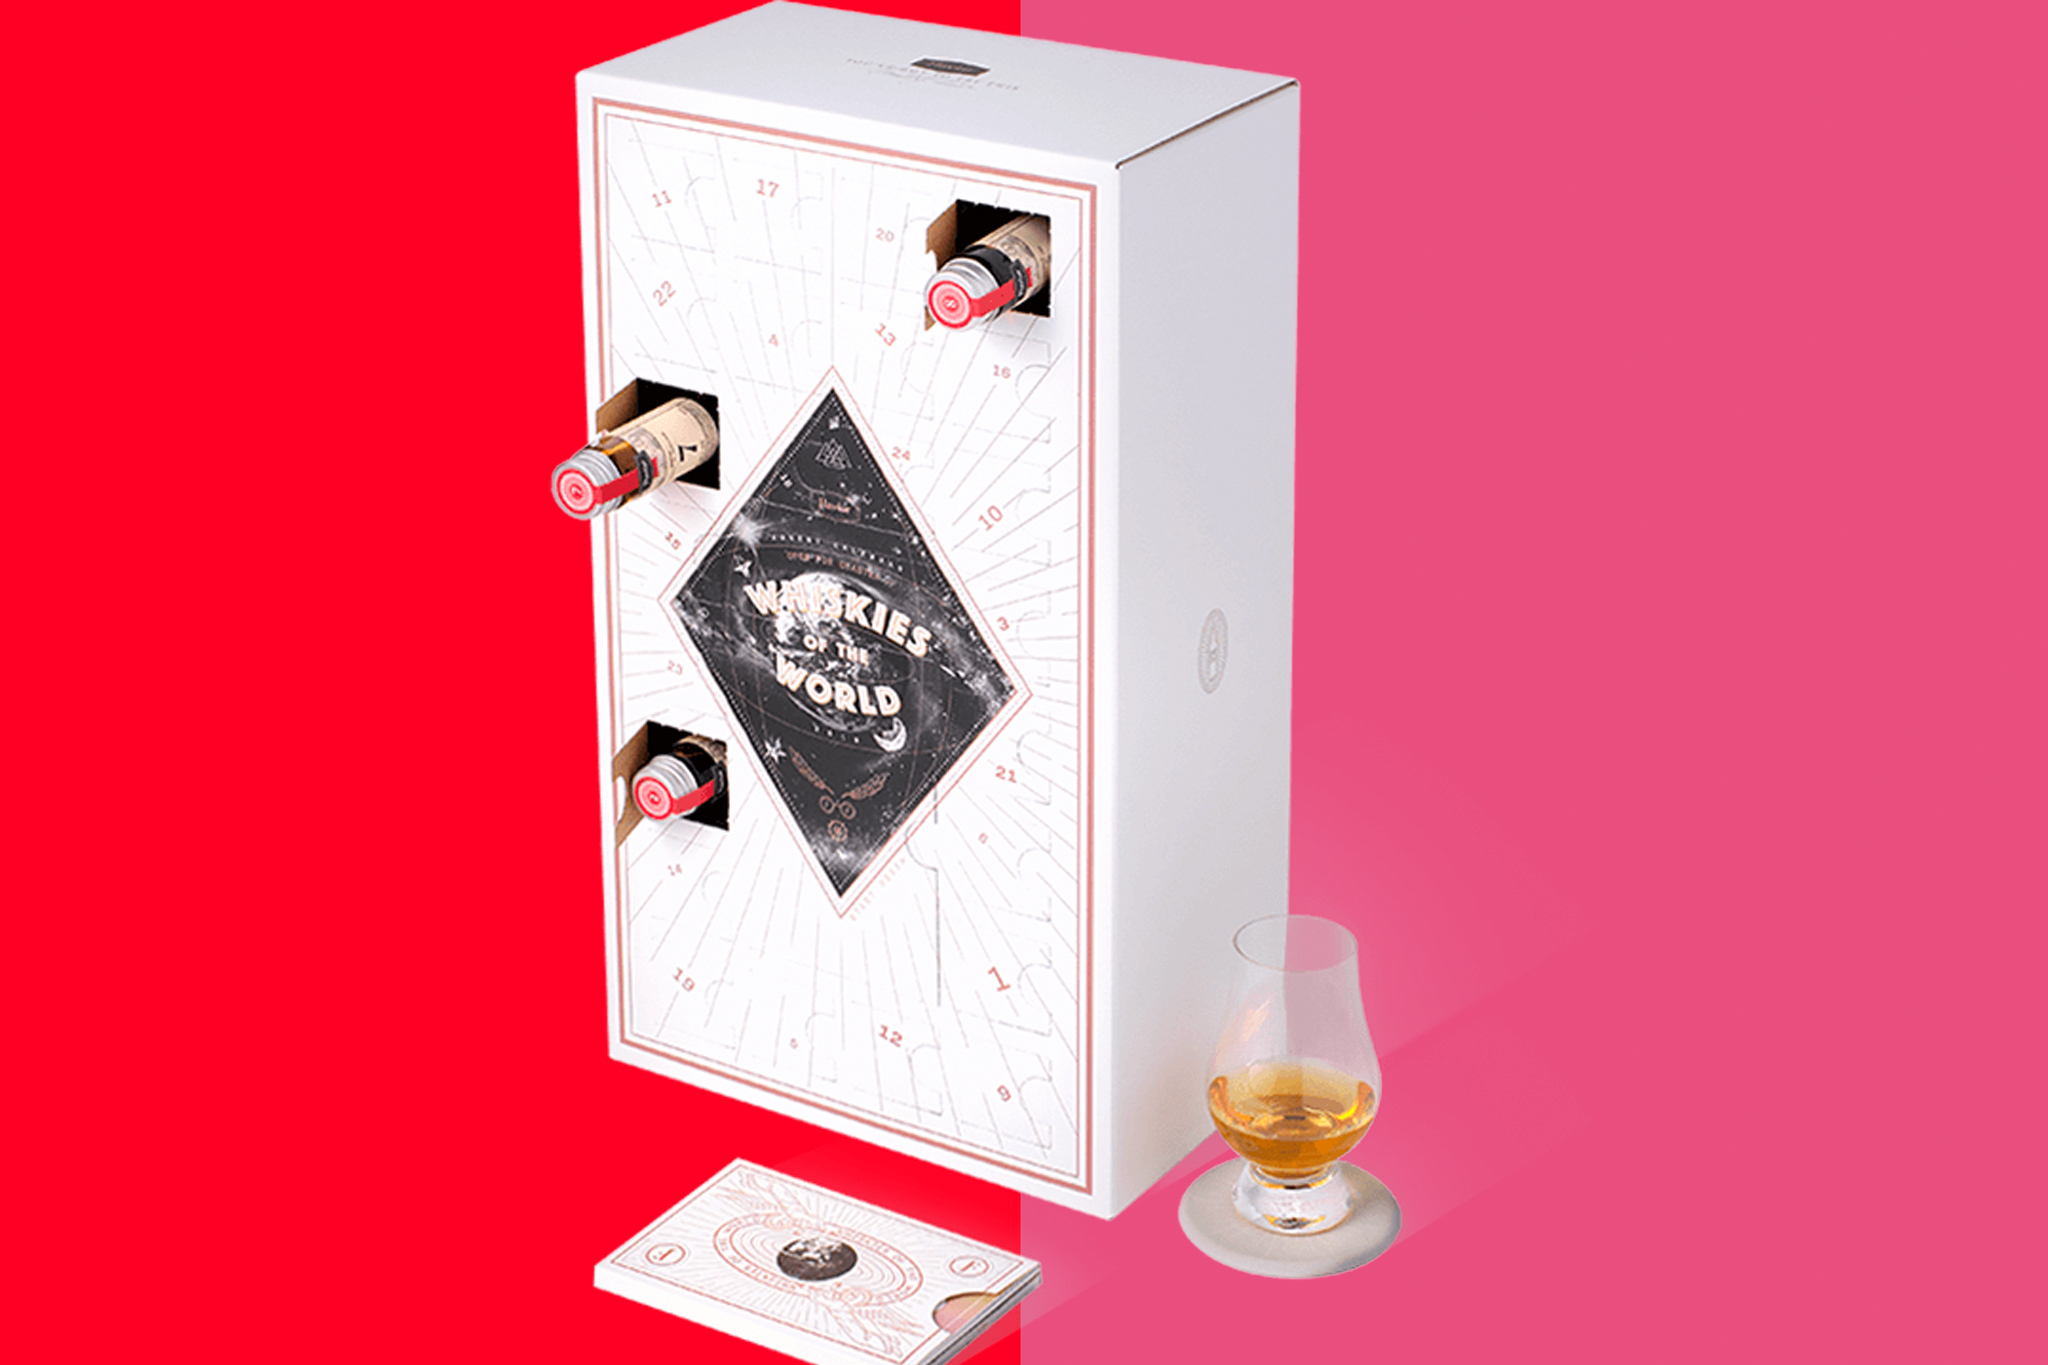 Preorder this whiskey advent calendar from Flaviar before it sells out